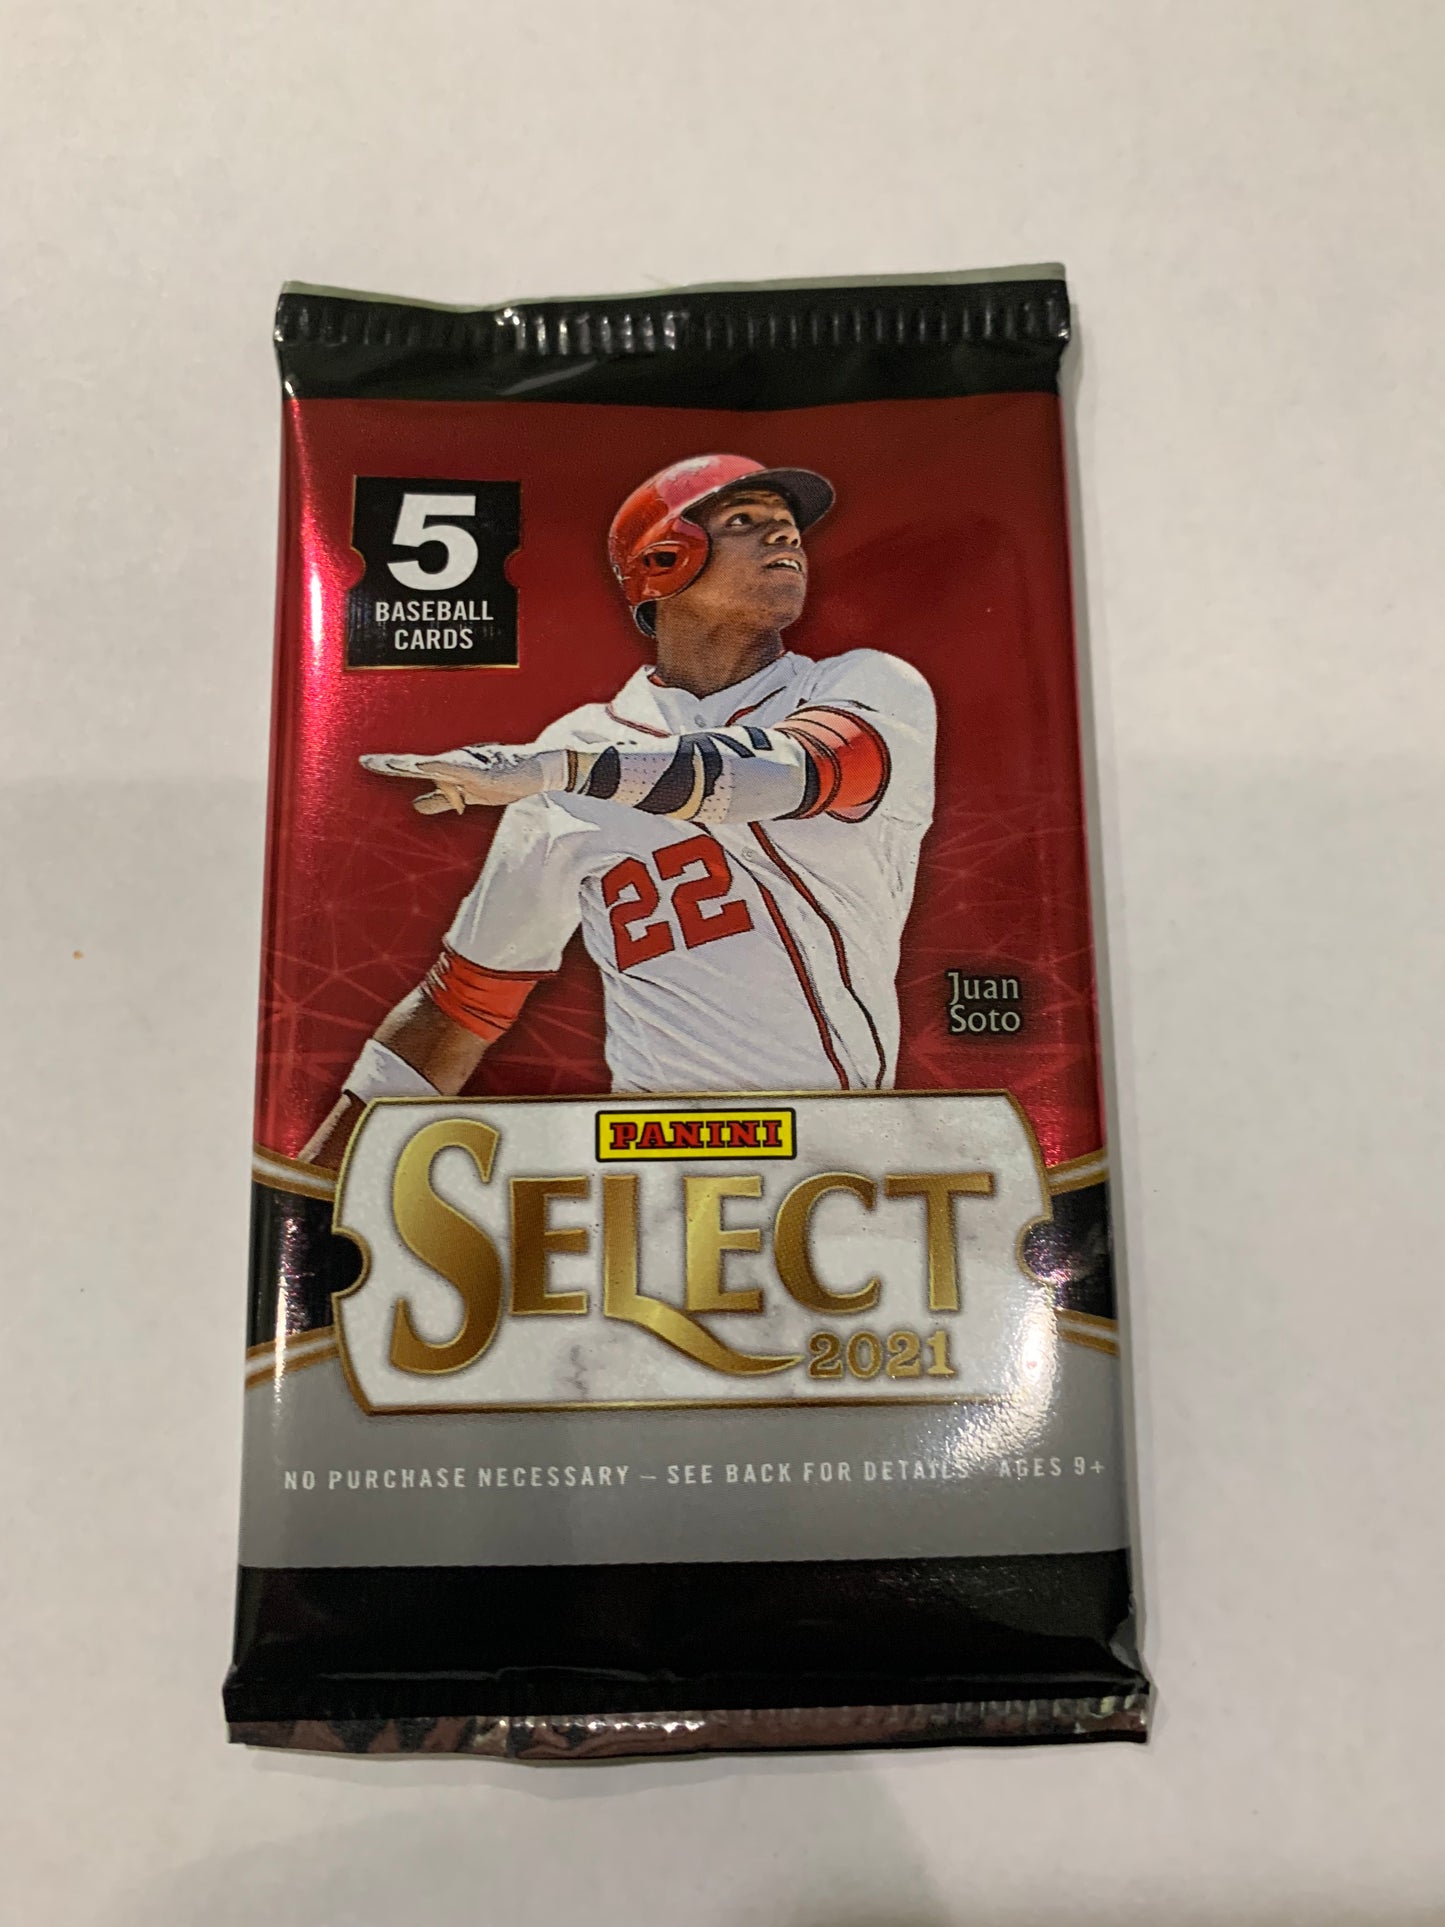 2021 Panini Select Baseball Hobby Packs. This listing is for one pack.